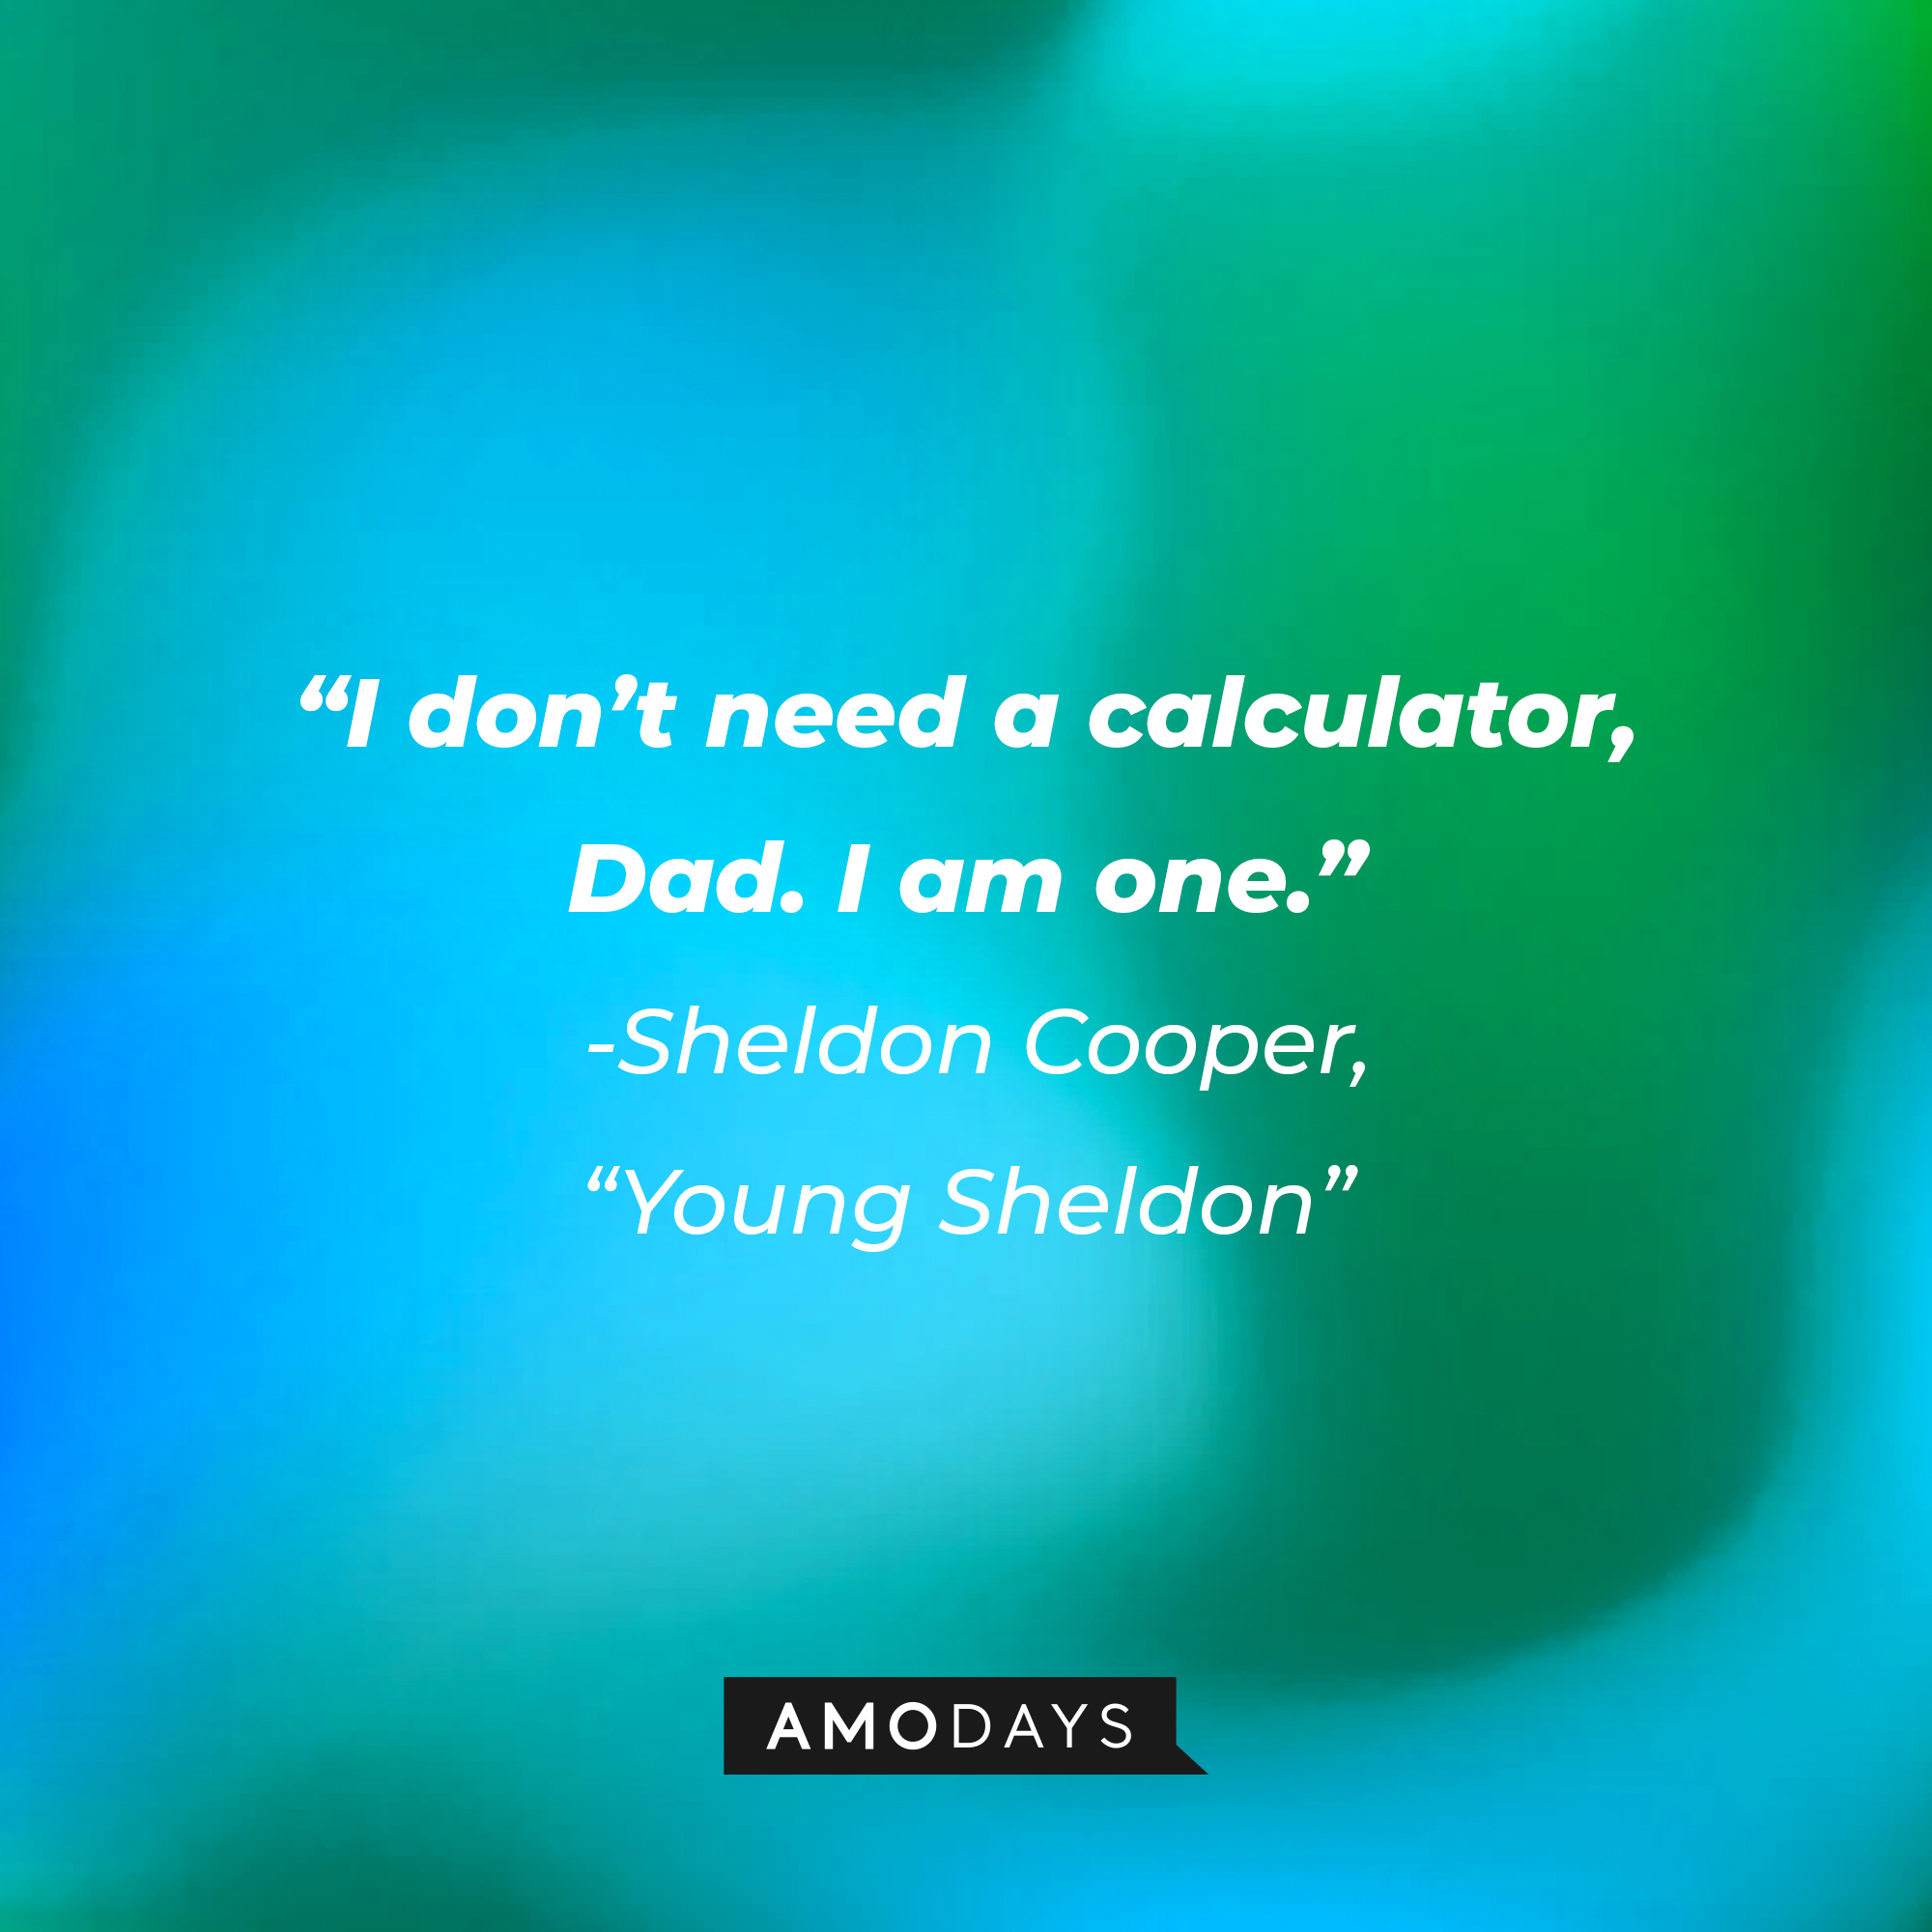 Sheldon Cooper's quote from "Young Sheldon": “I don’t need a calculator, Dad. I am one.” | Source: Amodays